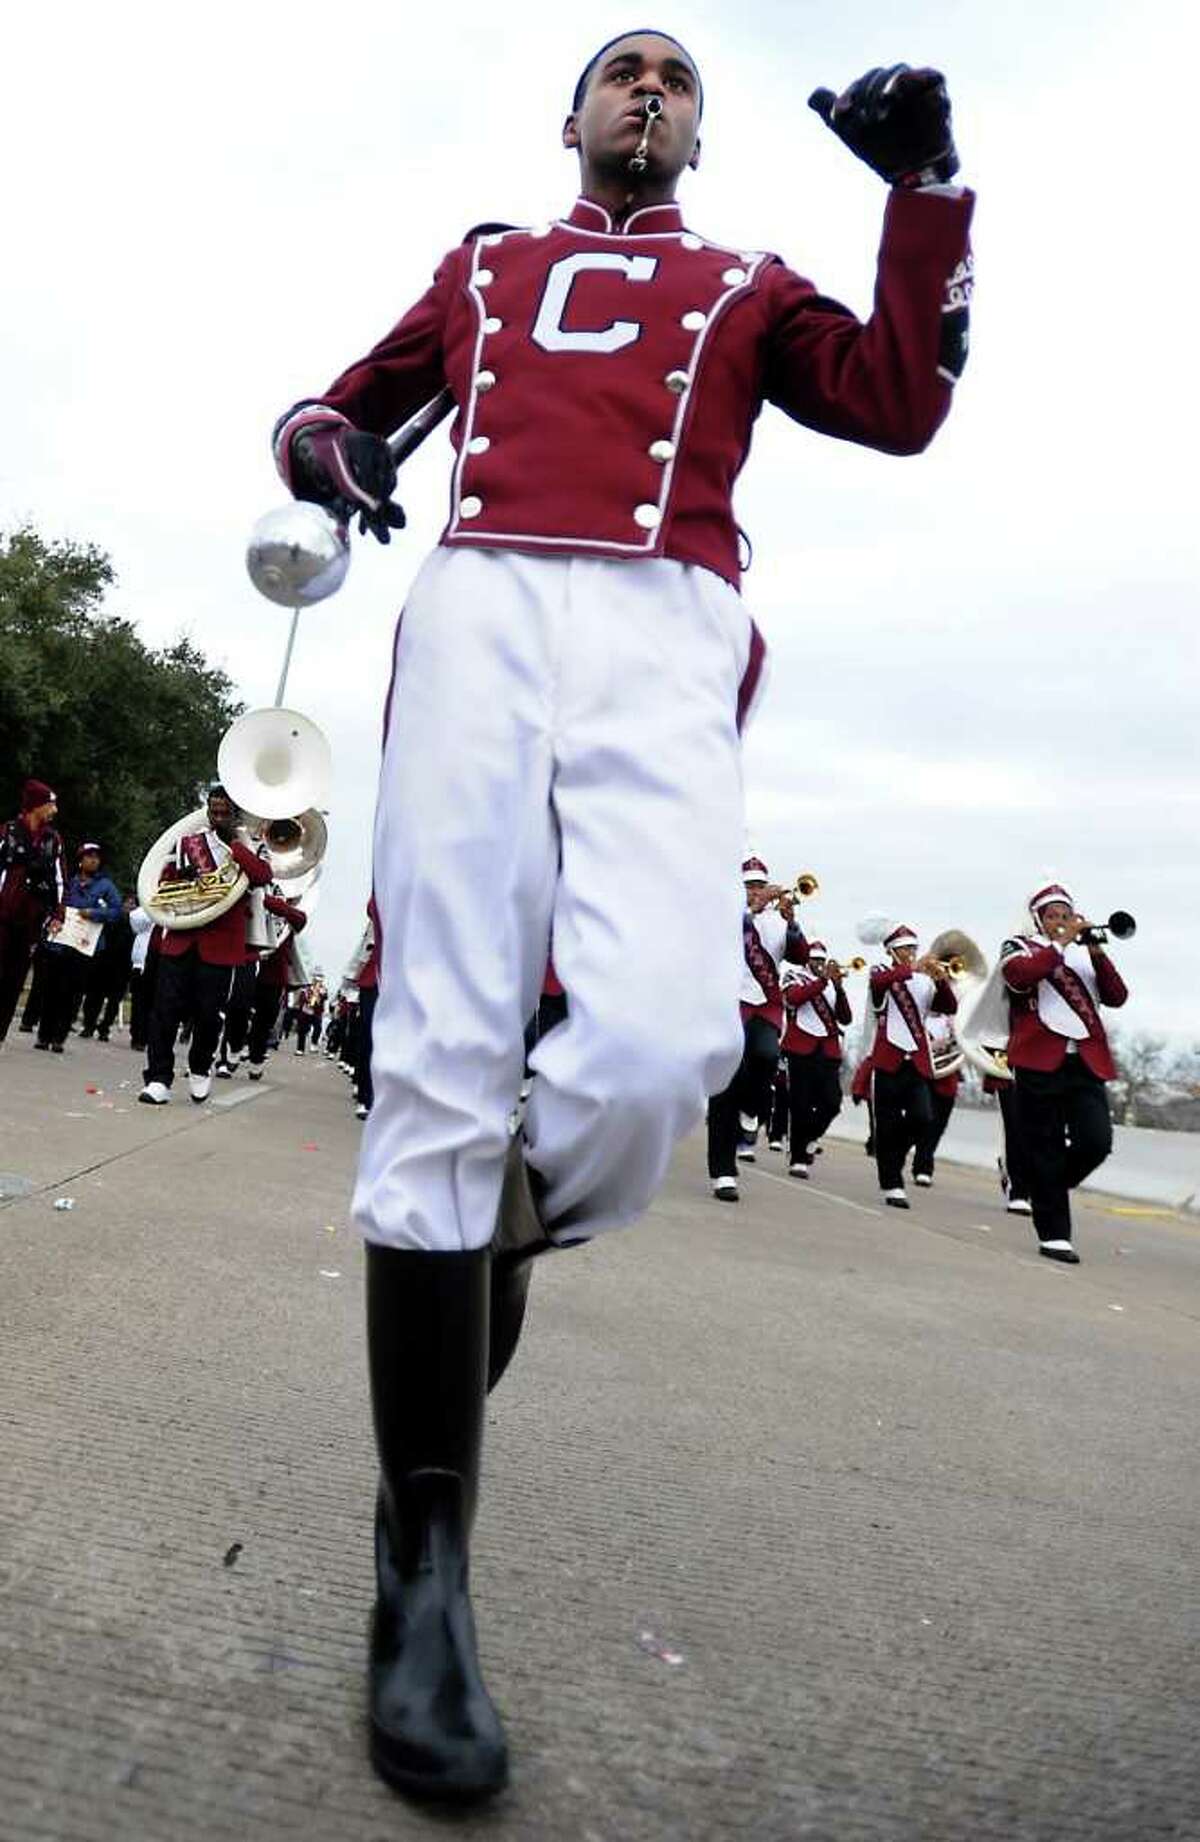 The Central High School marching band performs during the Martin Luther King, Jr. Day Parade in Beaumont, Saturday. Tammy McKinley/The Enterprise